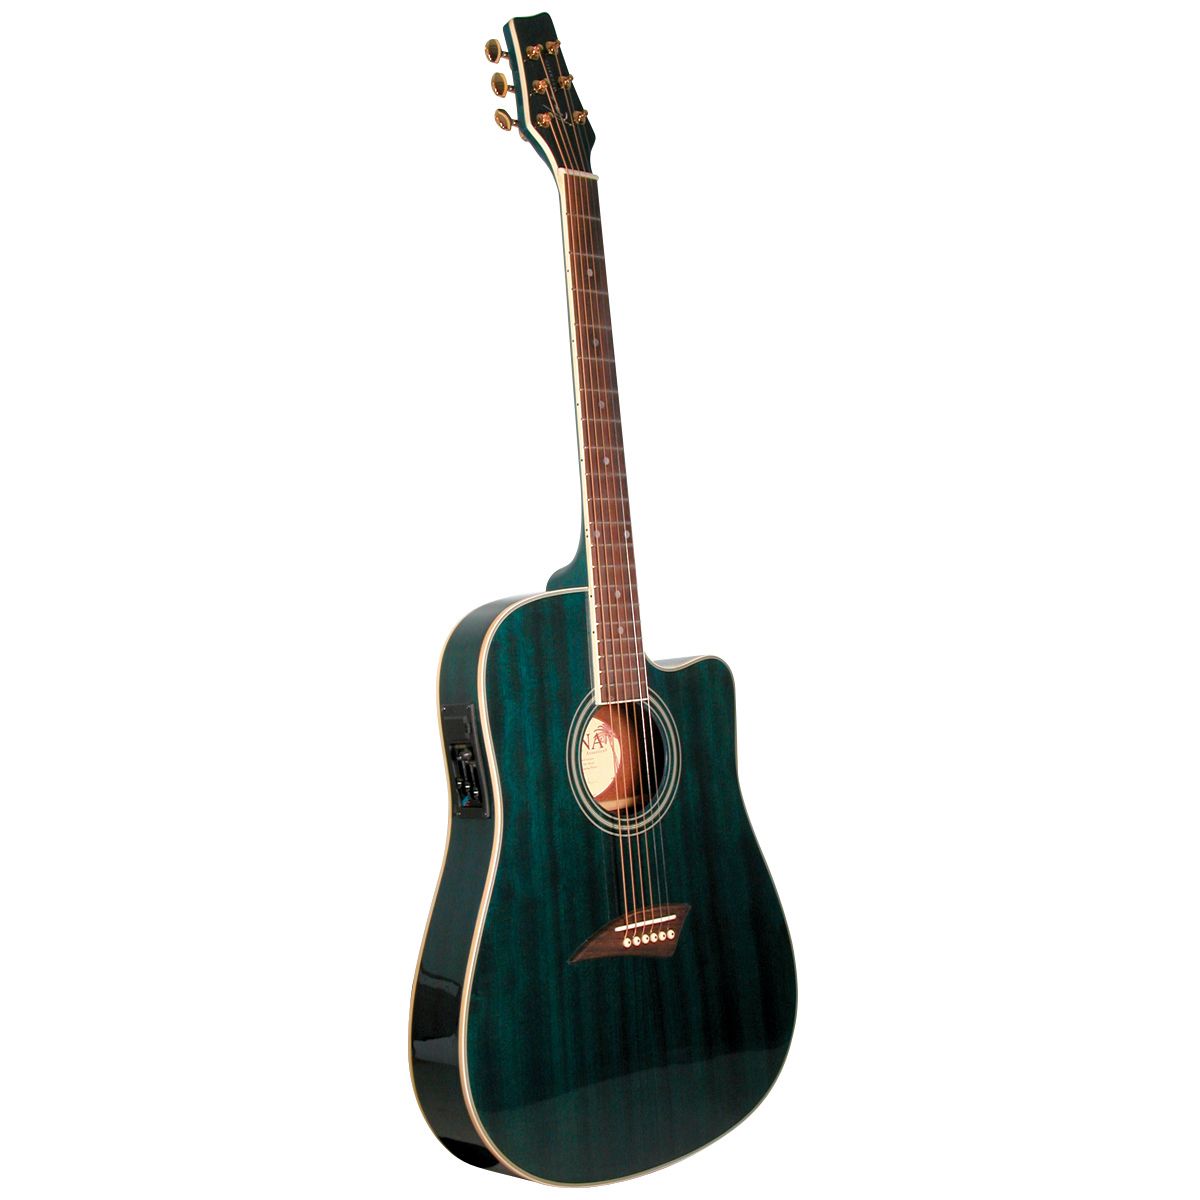 Kona Thin Body Acoustic/Electric Guitar with High-Gloss Transparent Blue Finish